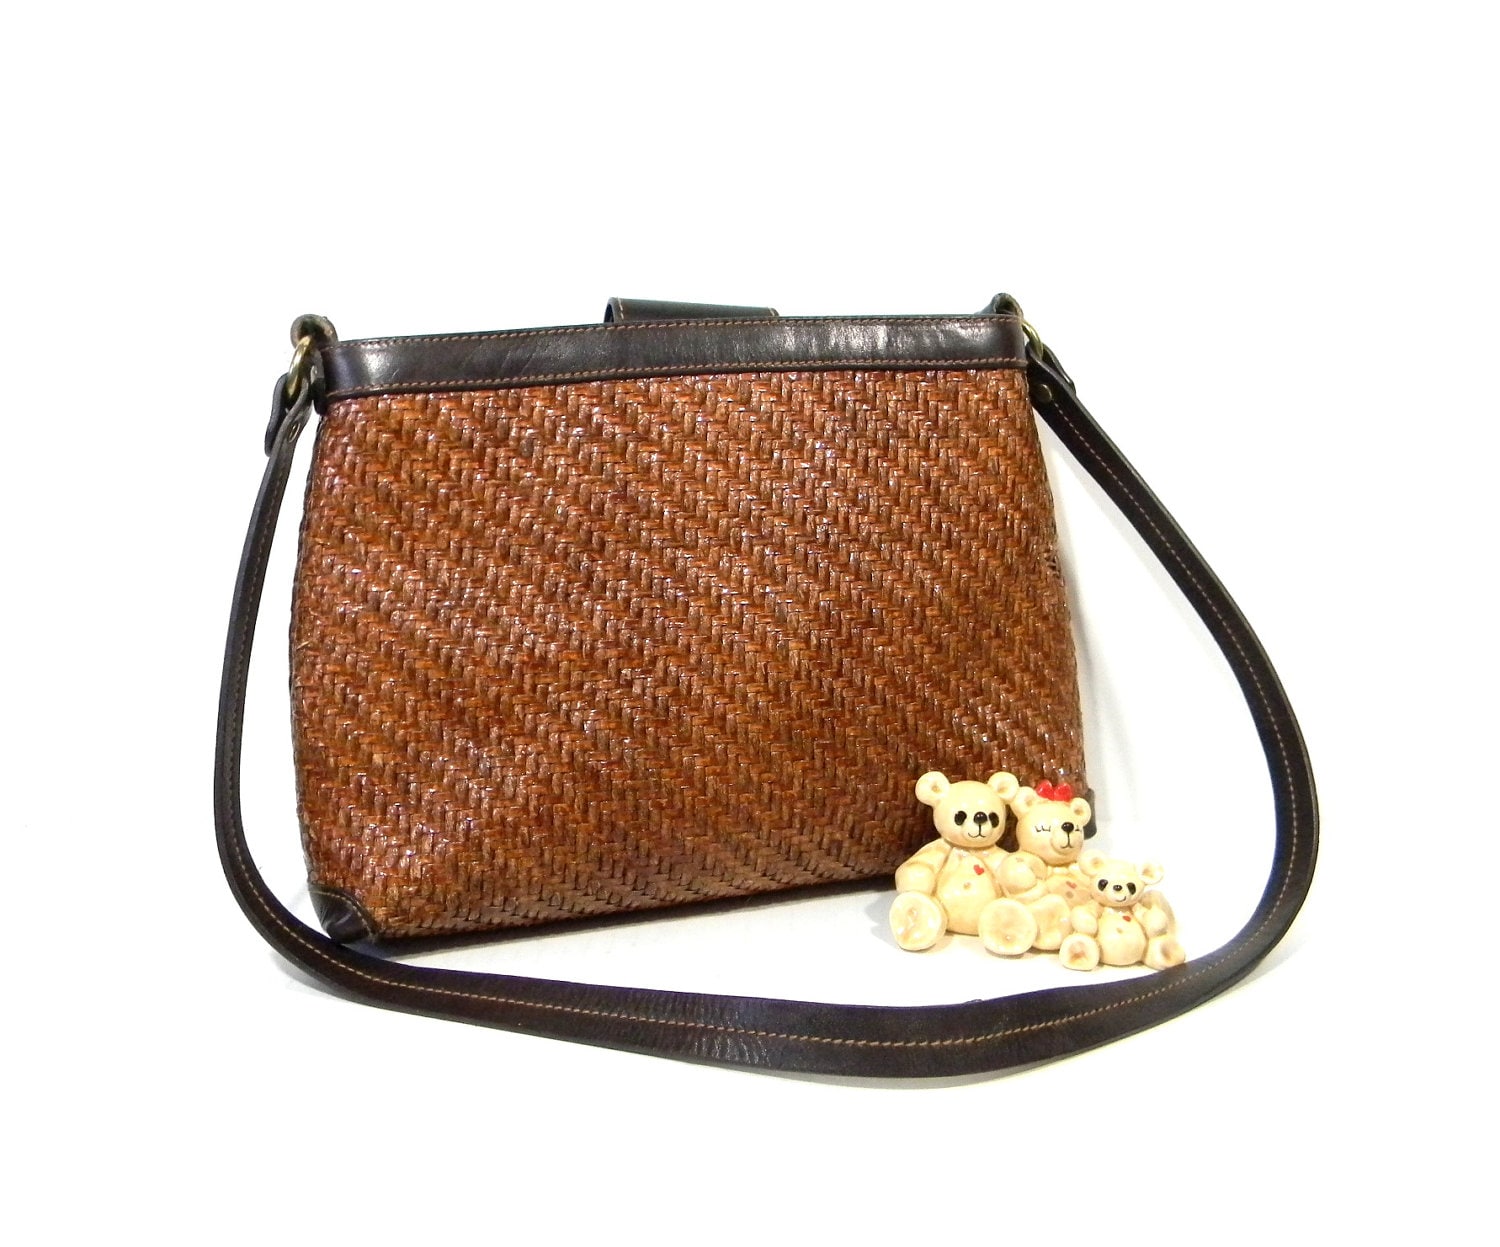 Vintage Fossil Purse. Woven Straw Leather Handbag in Brown.